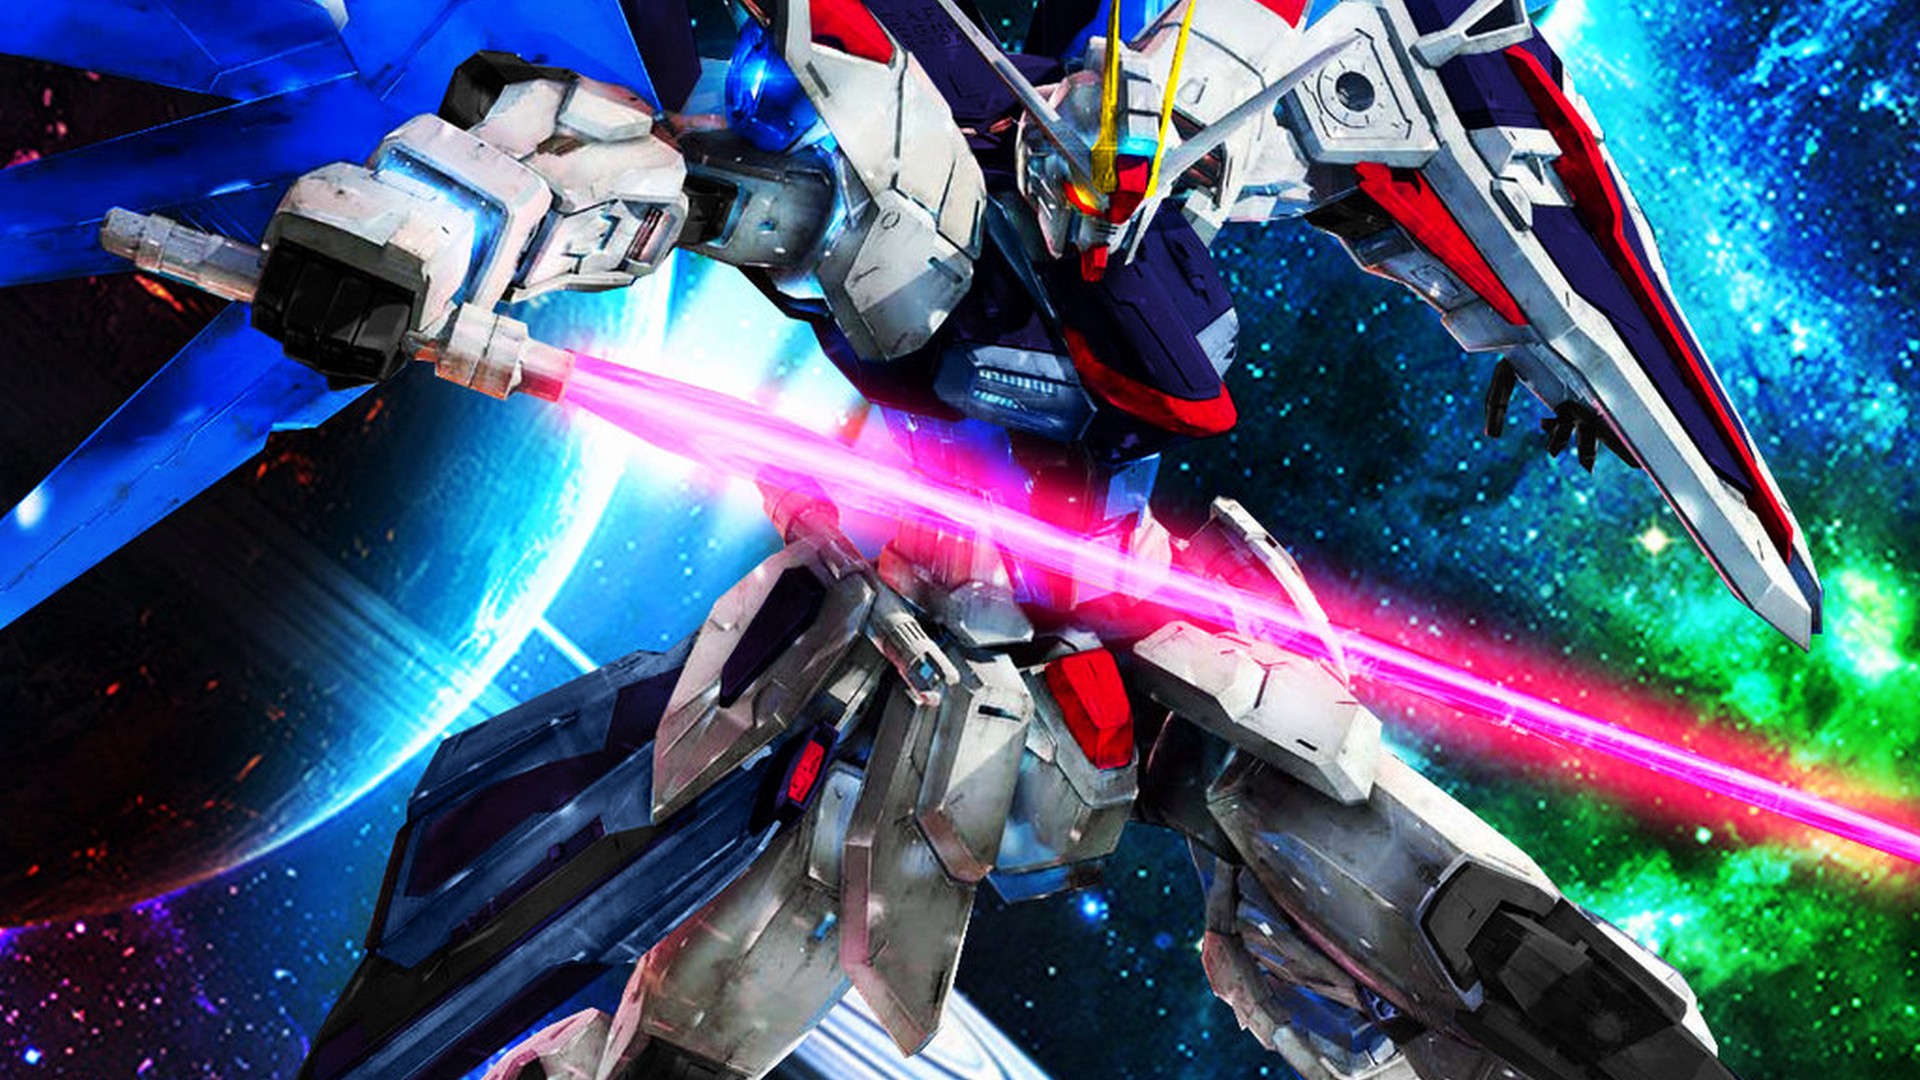 Wallpaper Gundam With high-resolution 1920X1080 pixel. You can use this wallpaper for your Windows and Mac OS computers as well as your Android and iPhone smartphones